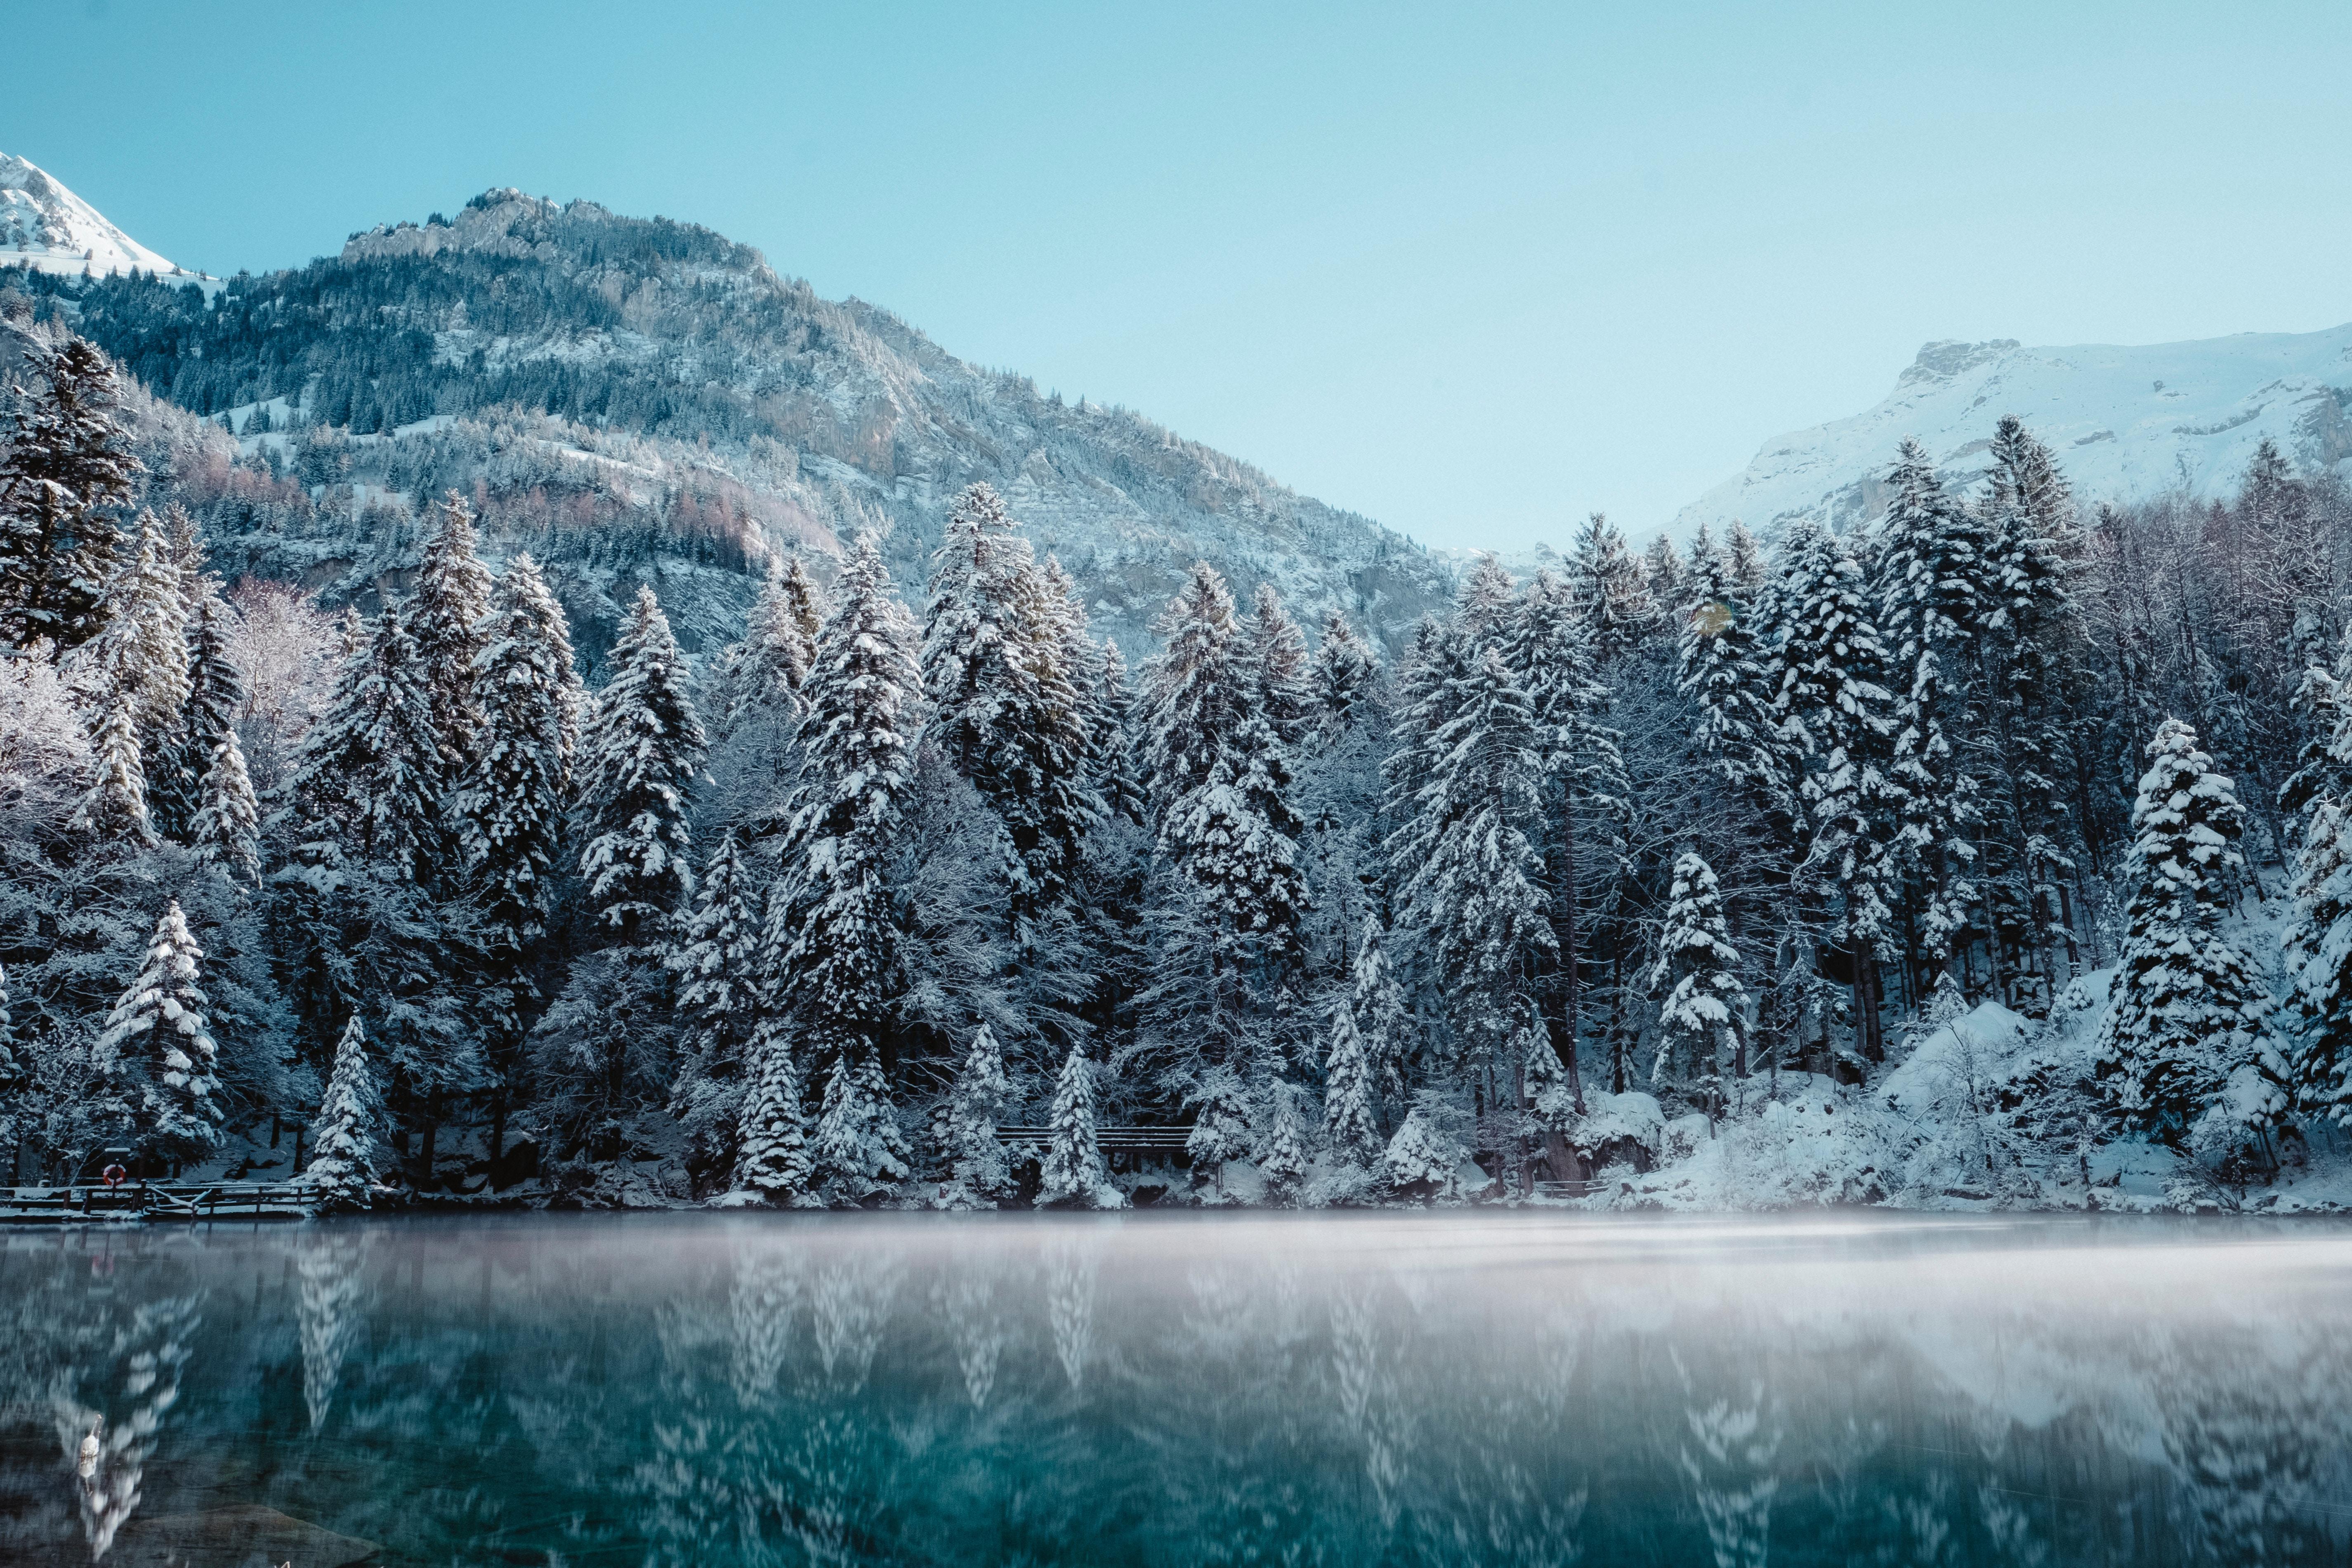 5701x3801 #mountain, #landscape, #ice, #forest, #frost, #frozen, #white, #mist, #mystic, #outdoors, #blue sky, #cold, #morning, #snow, #Free image, #dew, #lake, #trees, #winter, #water, #reflection. Mocah HD Wallpaper